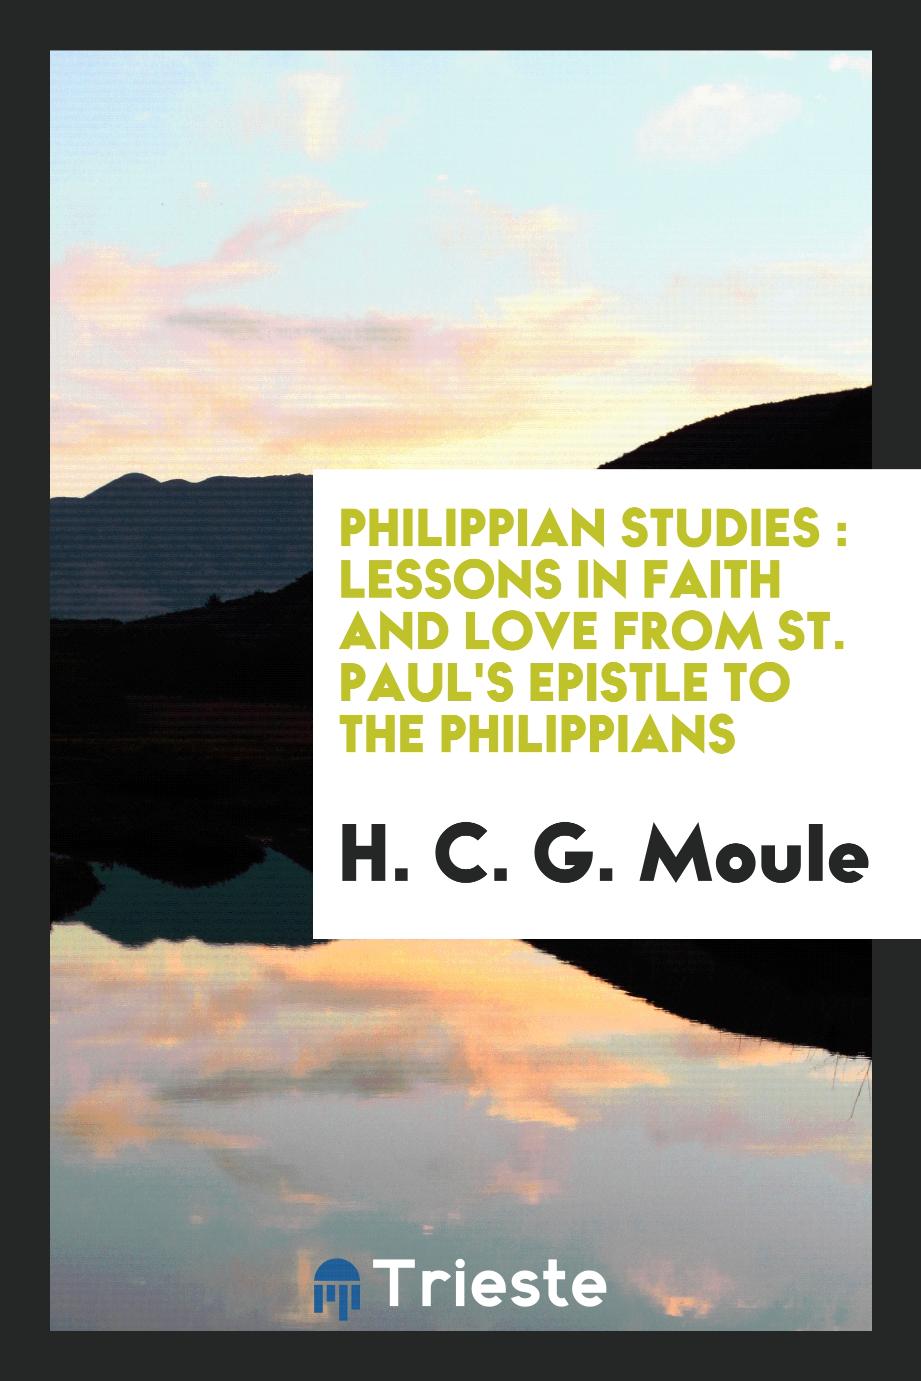 Philippian studies : lessons in faith and love from St. Paul's epistle to the Philippians